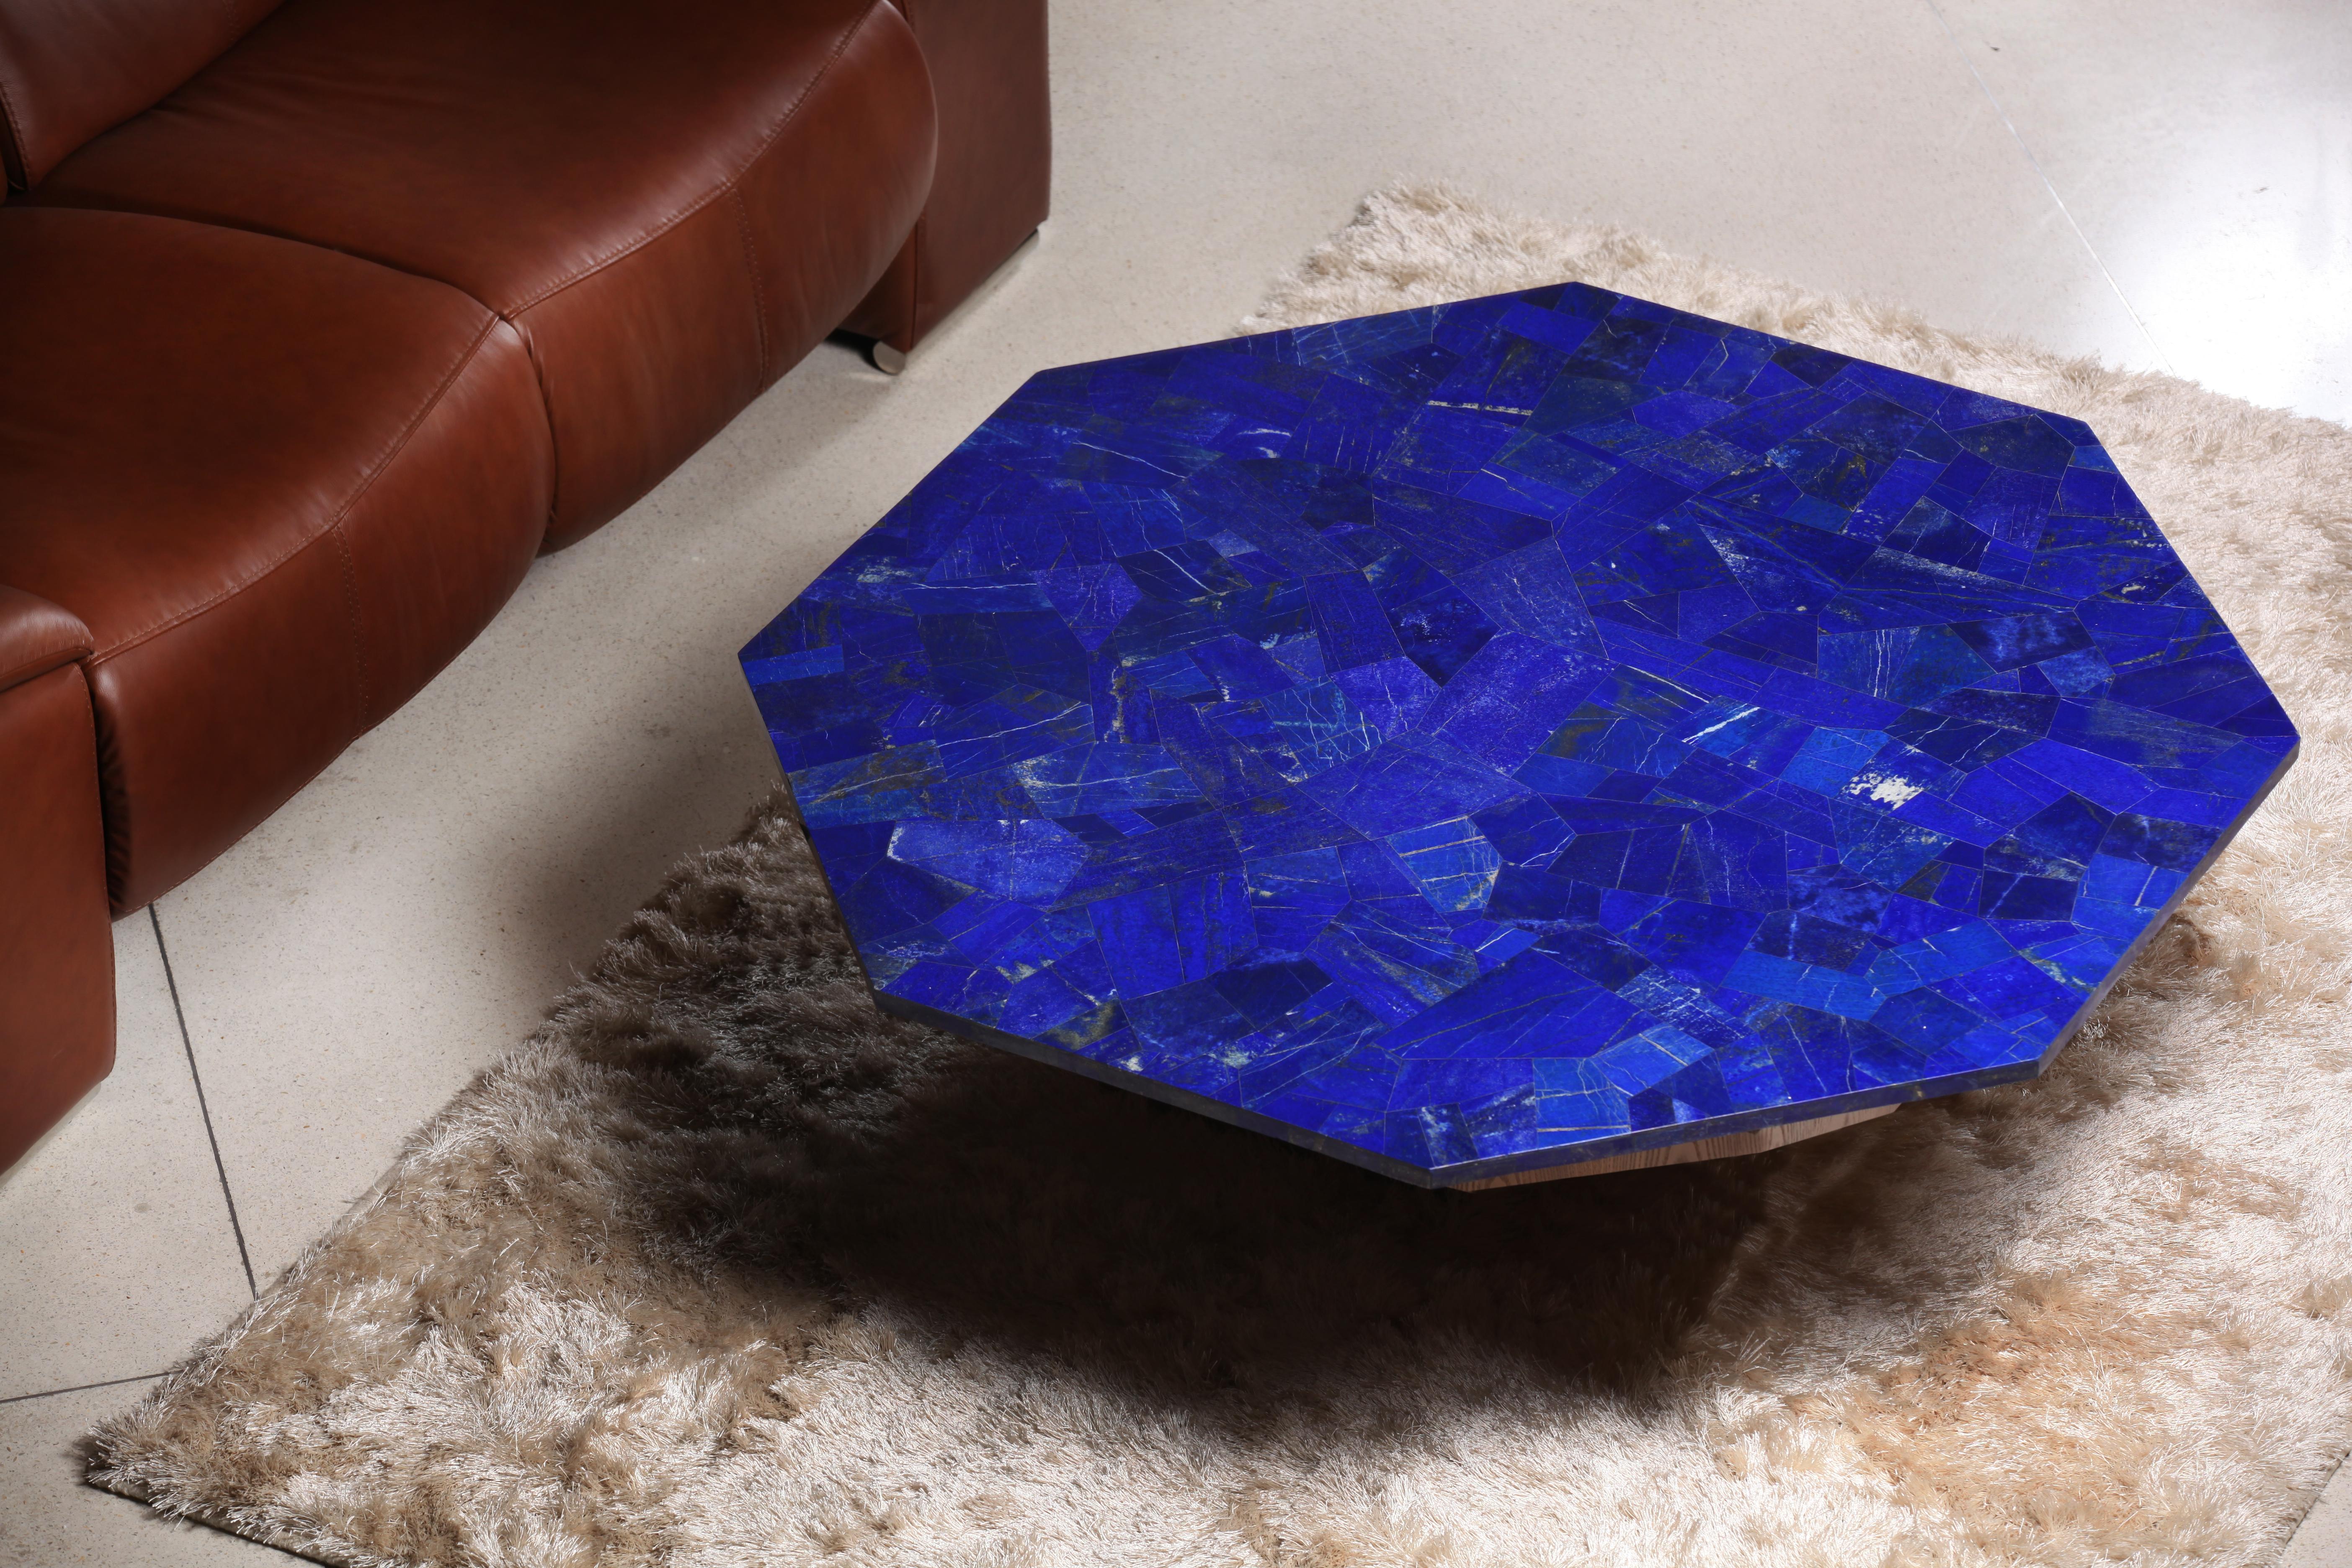 Majorelle Nesting Tables by Studio Lel
Dimensions: D 107 x W 107 x H 41 cm 
Materials:Lapis Lazuli, brass.

Taking its name from the Majorelle Garden in Marrakech, which was painted entirely by Jacques Majorelle in his signature rich shade of lapis